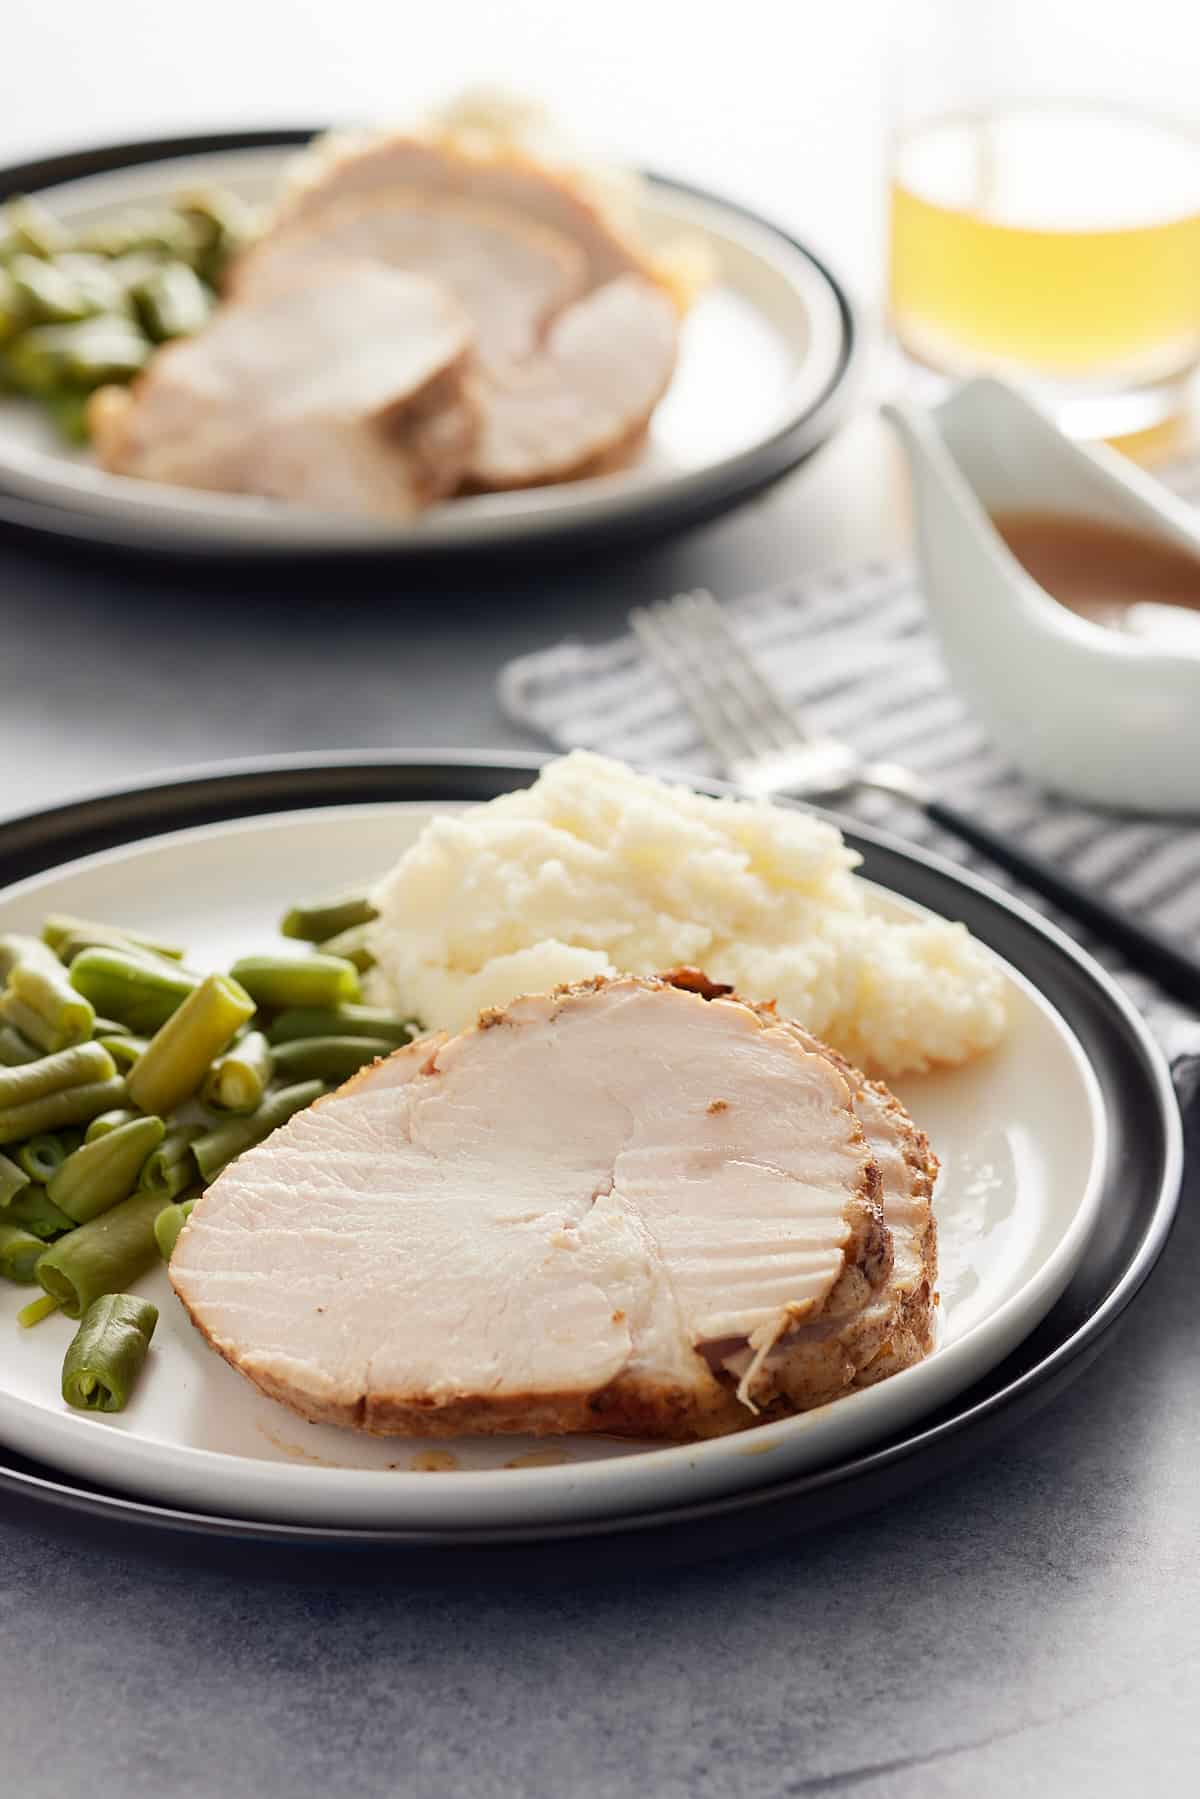 Table set with two servings of turkey breast, mashed potato and green beans set on white plates with a gravy jug set alongside